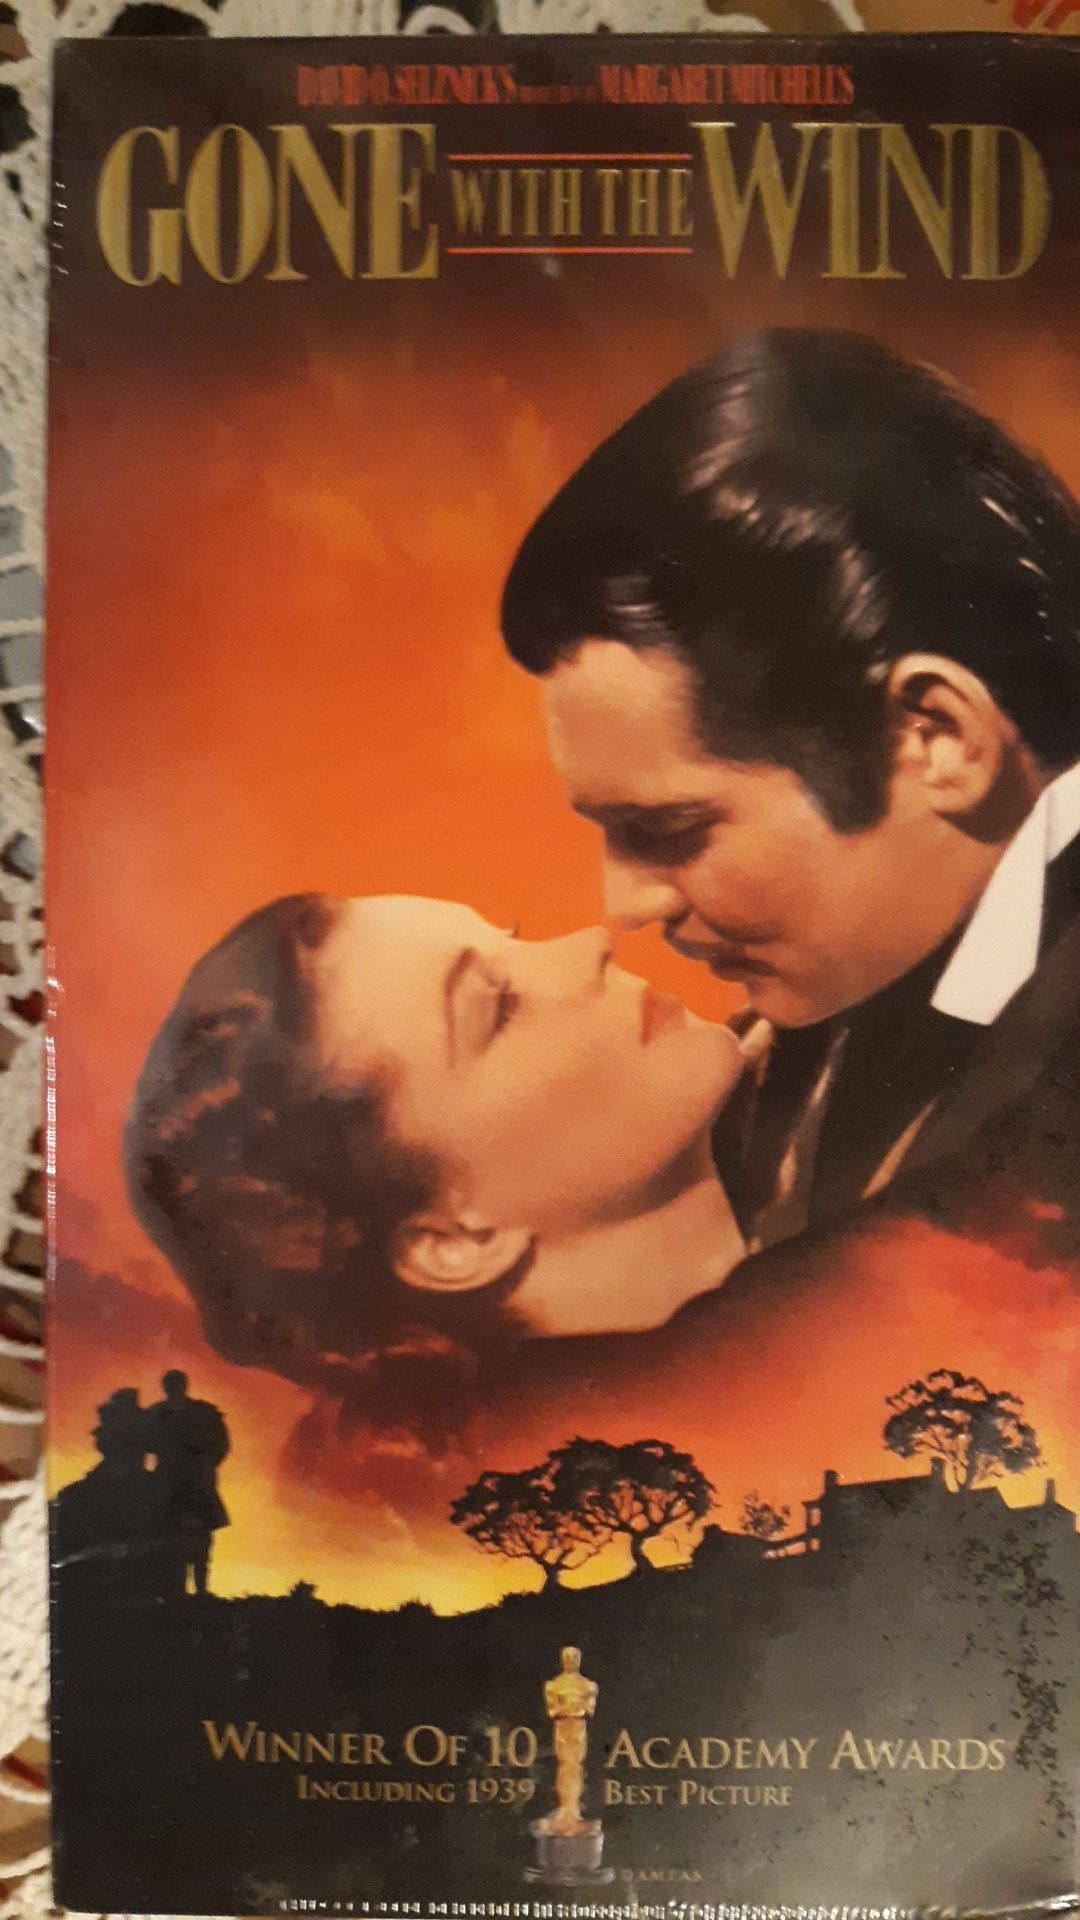 VHS tape of Gone With Wind new